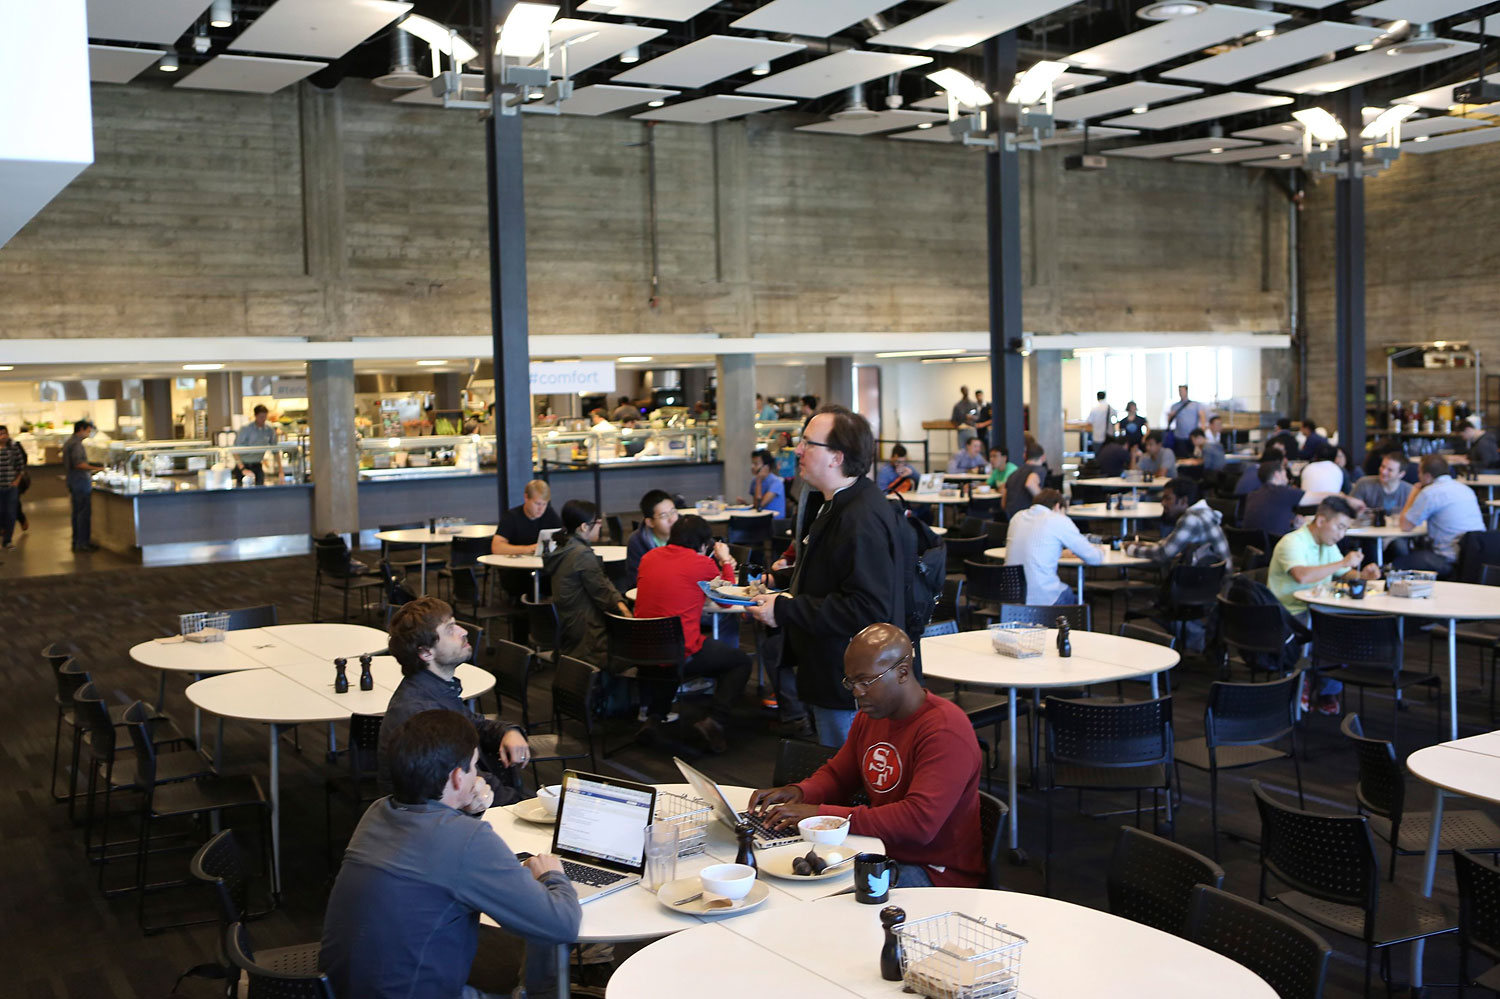 Twitter employees sit in a cafeteria at the company's headquarters in San Francisco, Oct. 4, 2013.